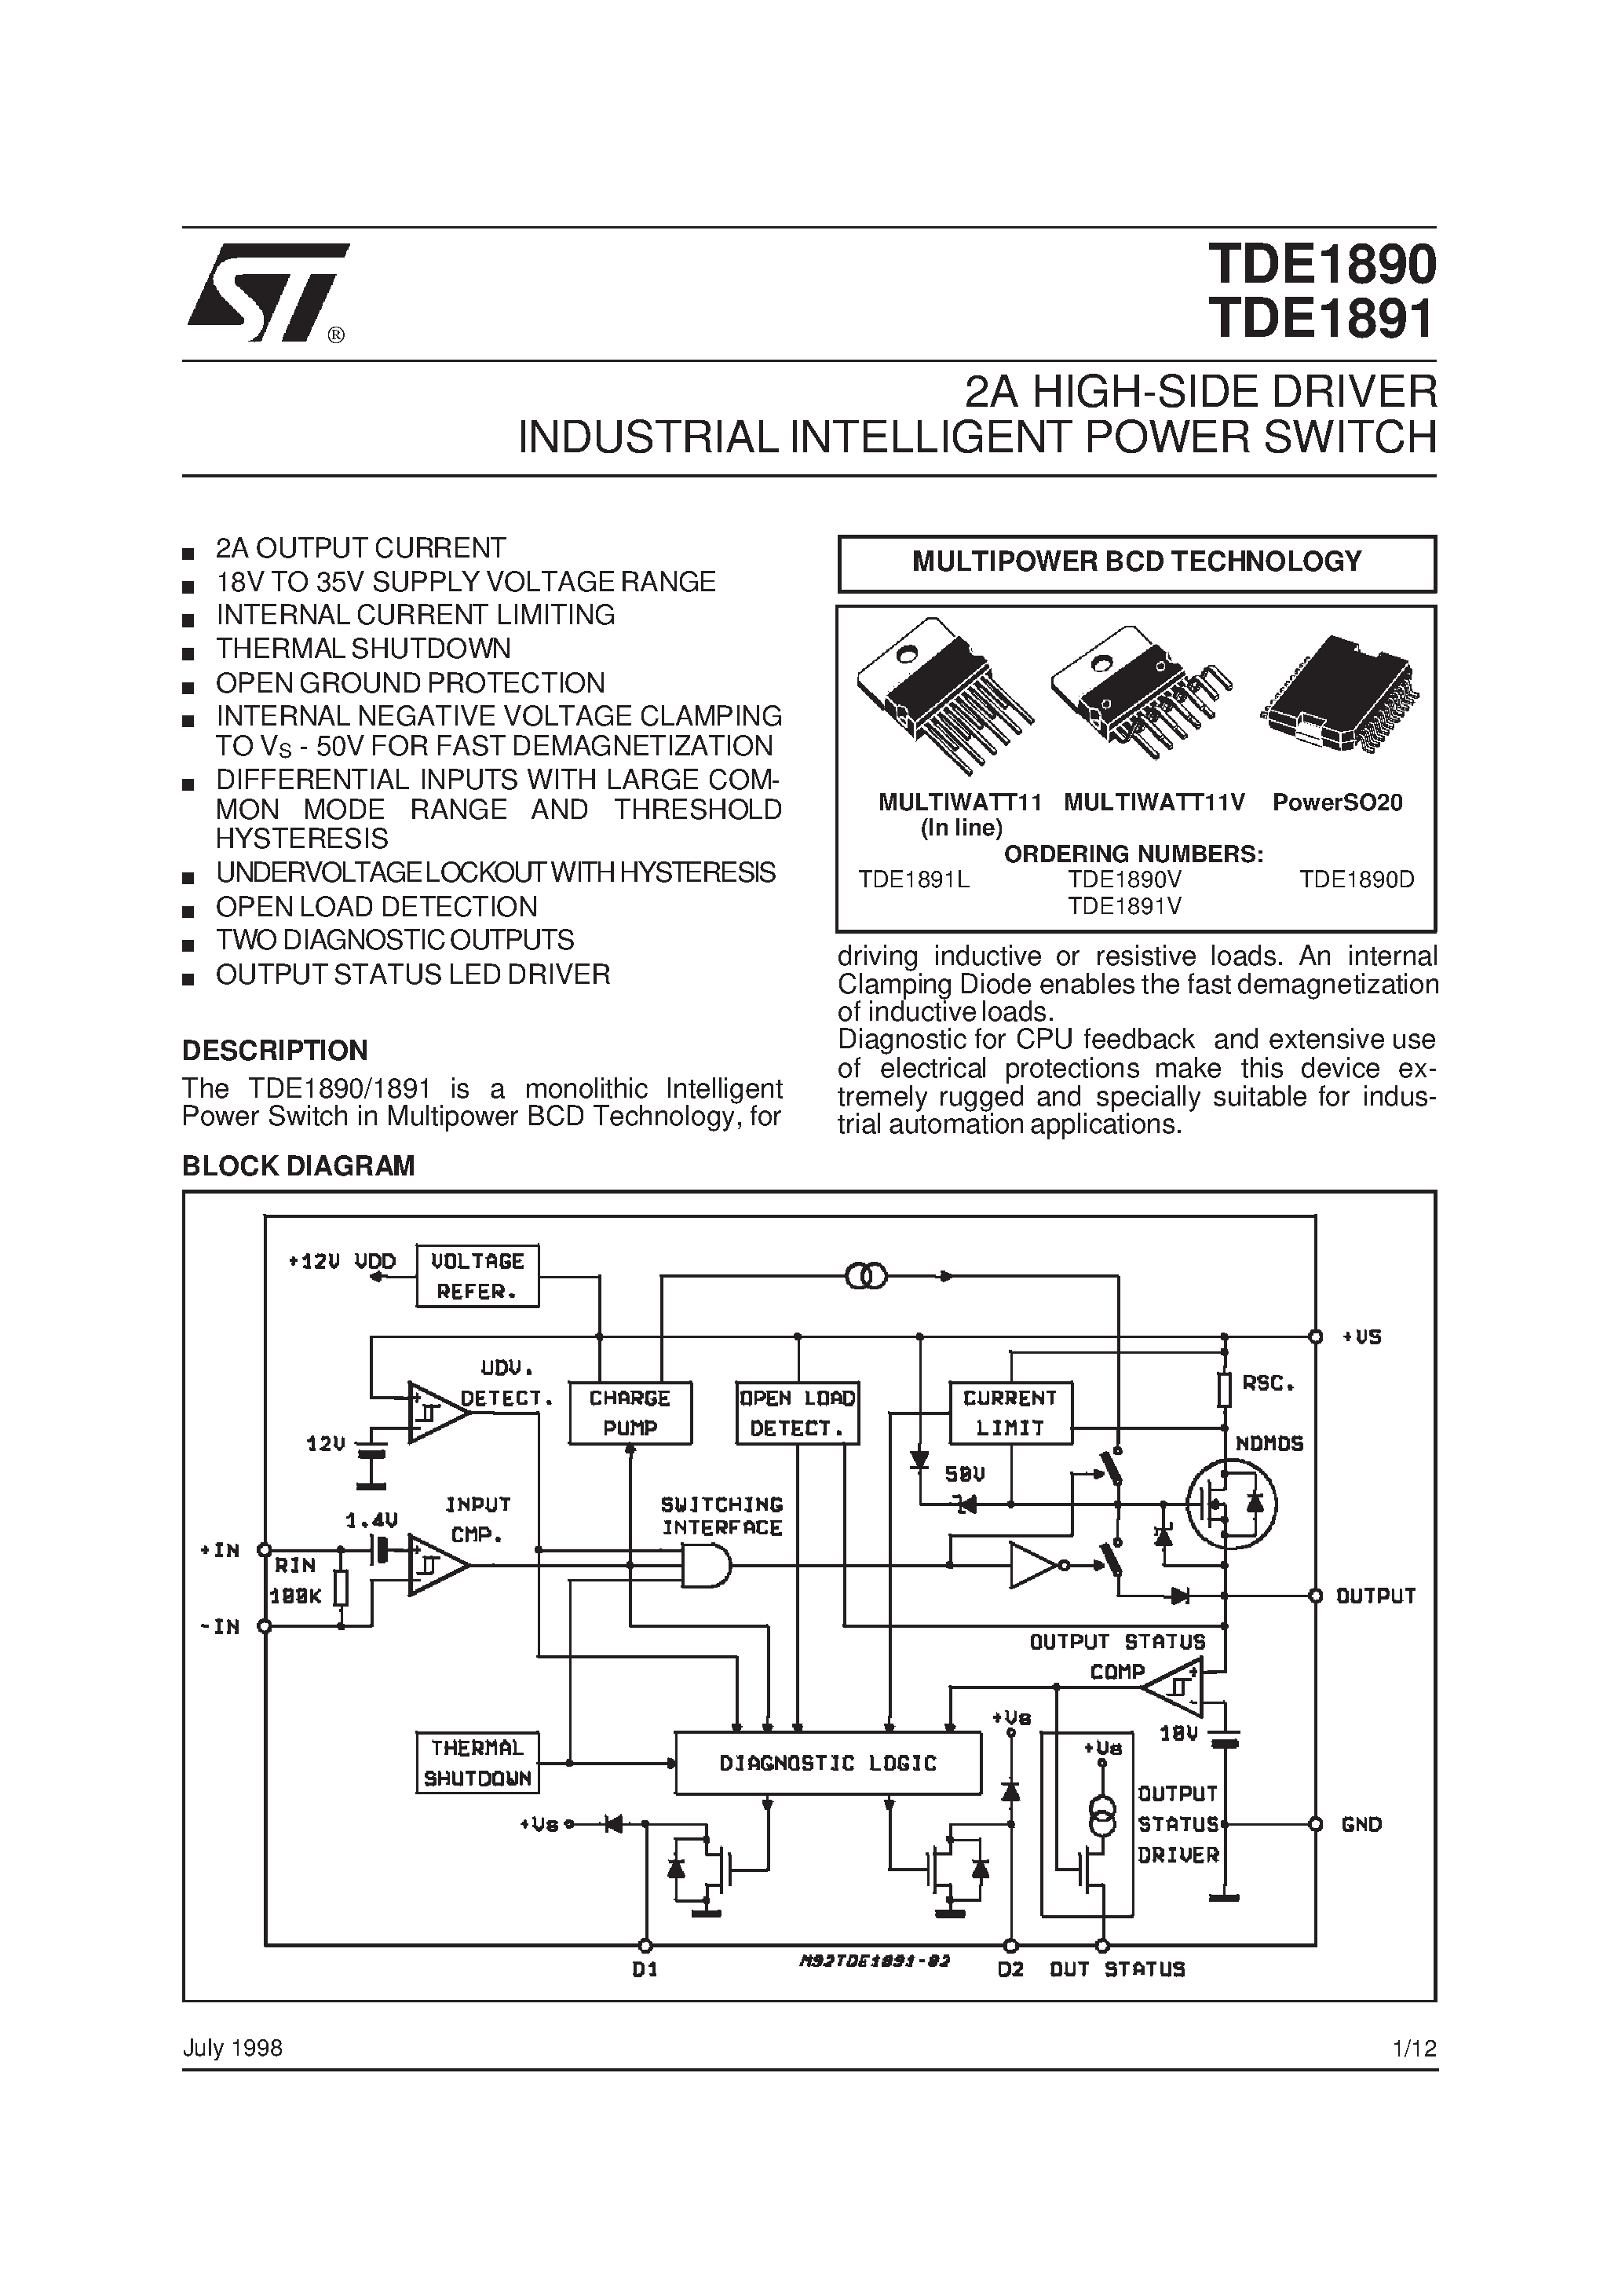 Datasheet TDE1890D - 2A HIGH-SIDE DRIVER INDUSTRIAL INTELLIGENT POWER SWITCH page 1